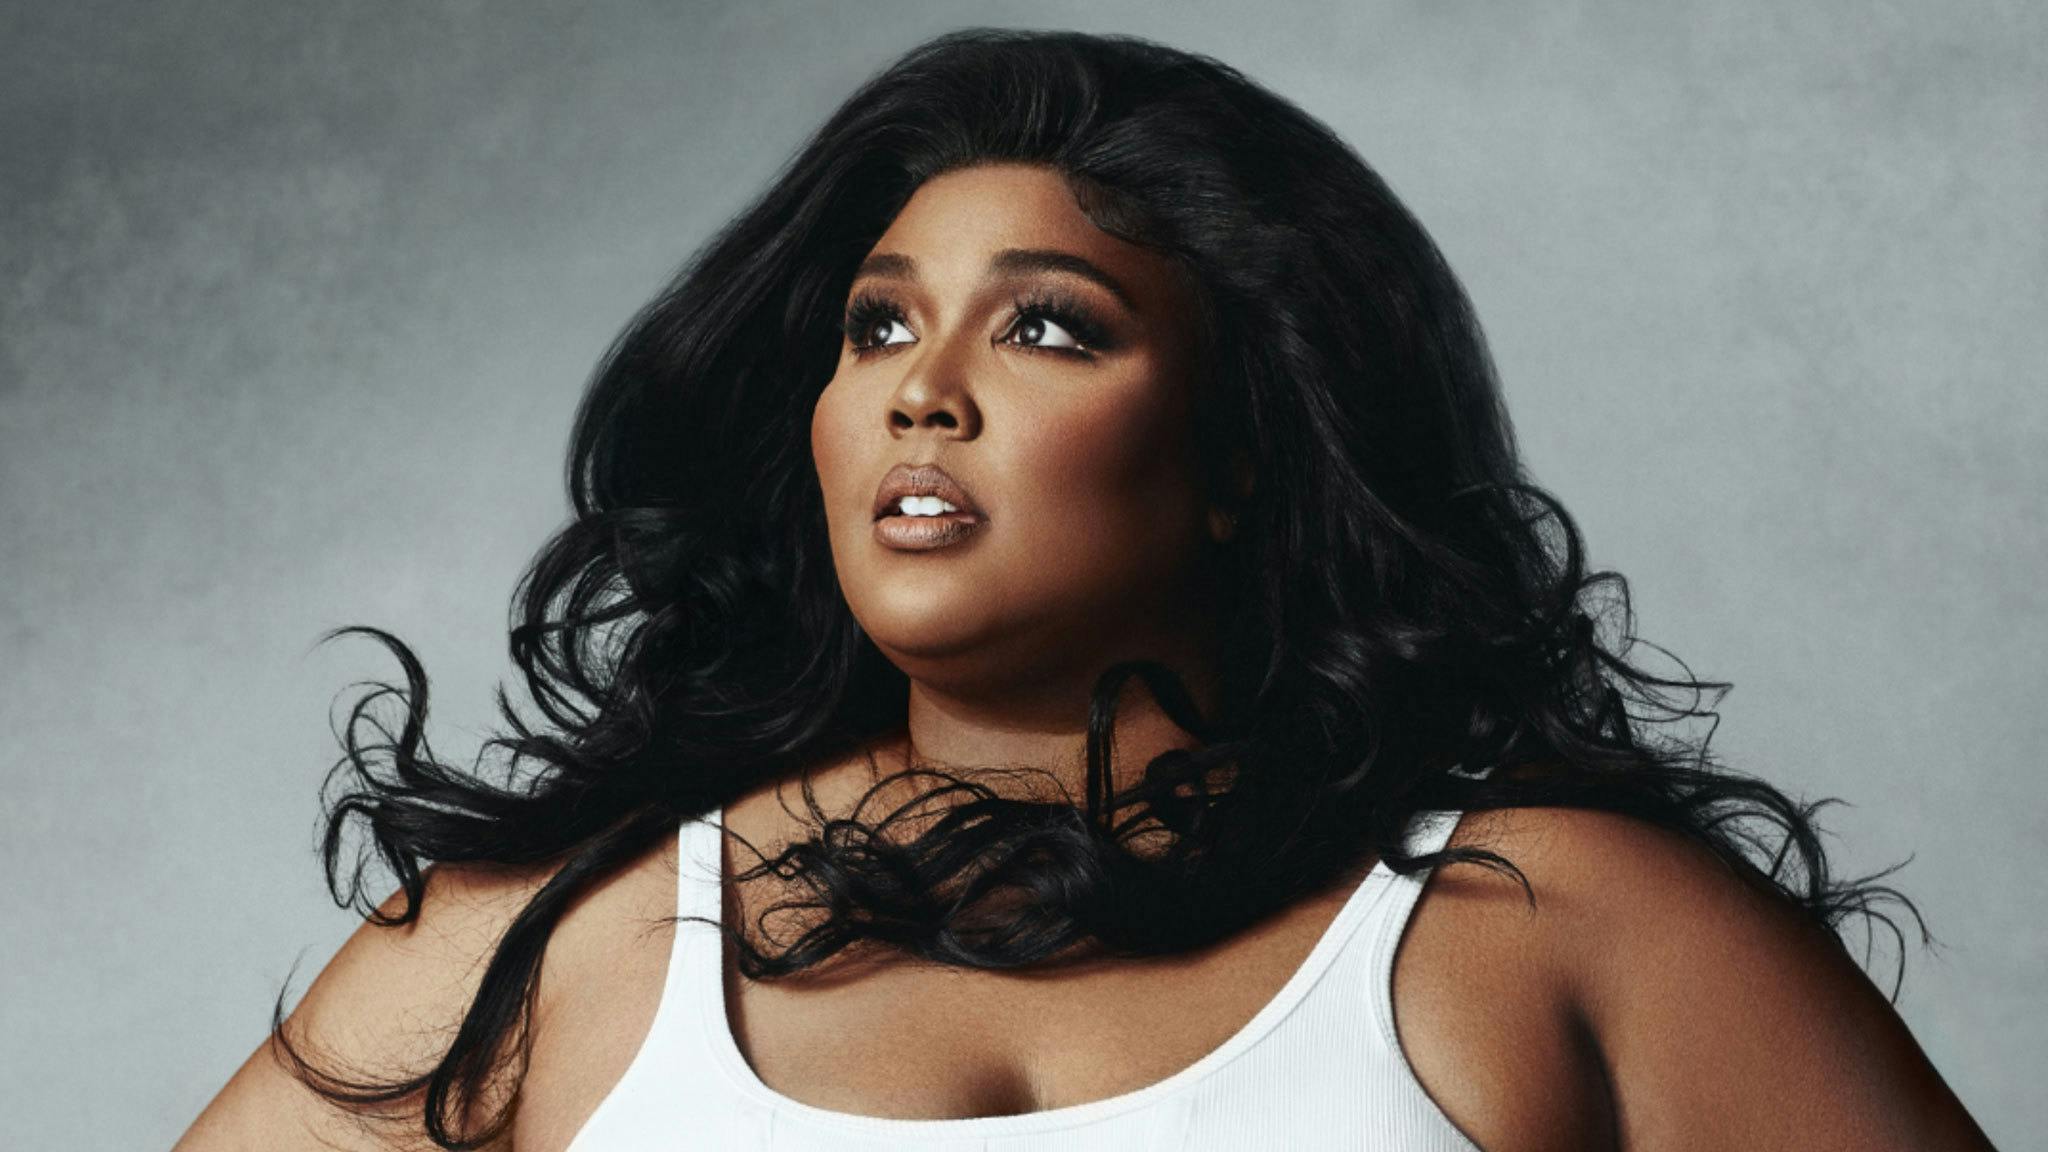 See Lizzo sing Du Hast by Rammstein onstage in Germany